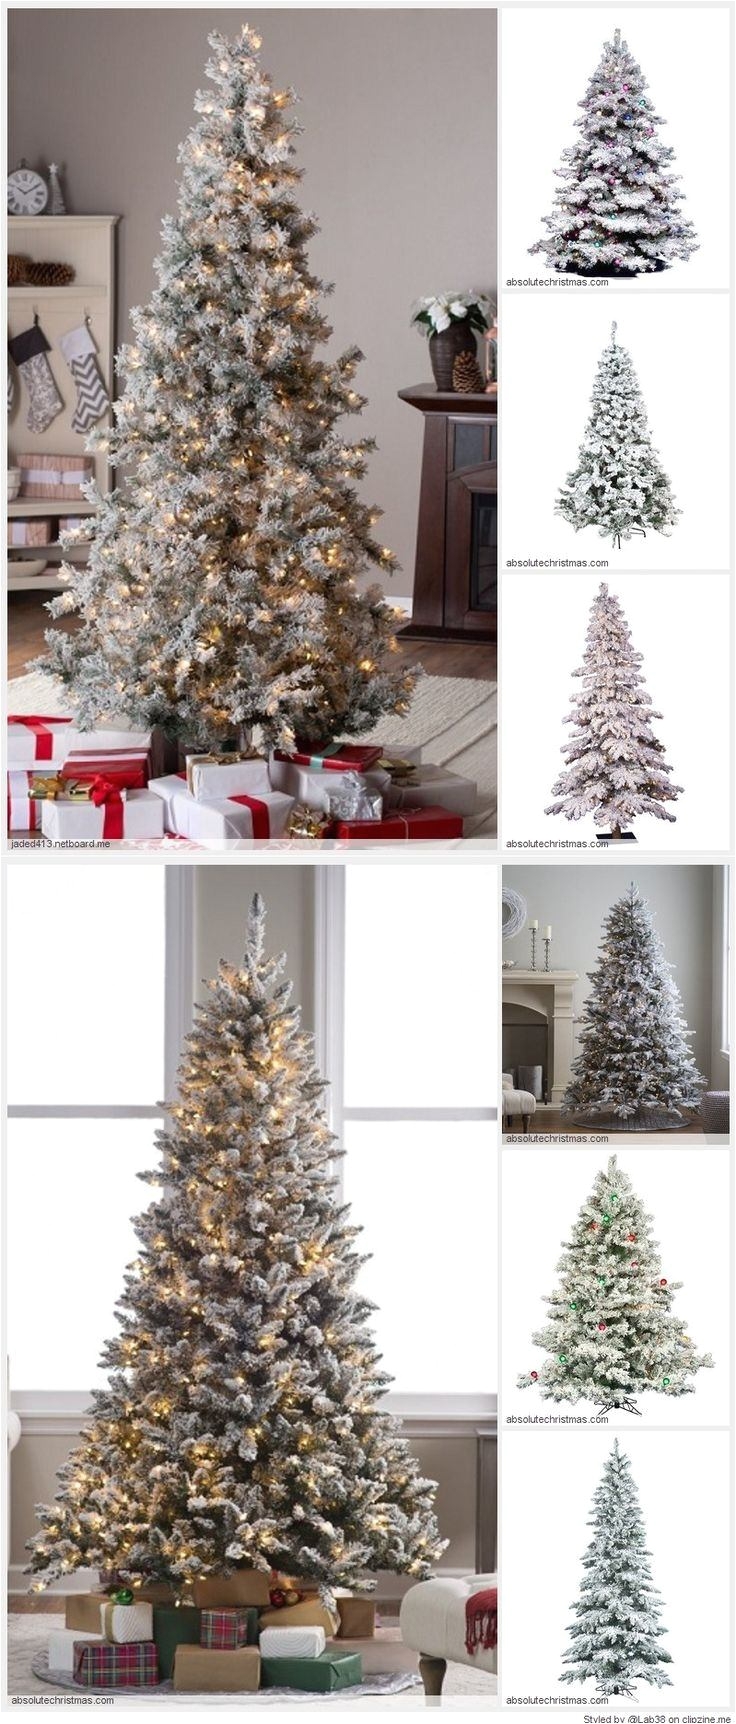 flocked fake christmas trees turn your home decor into a winter wonderland